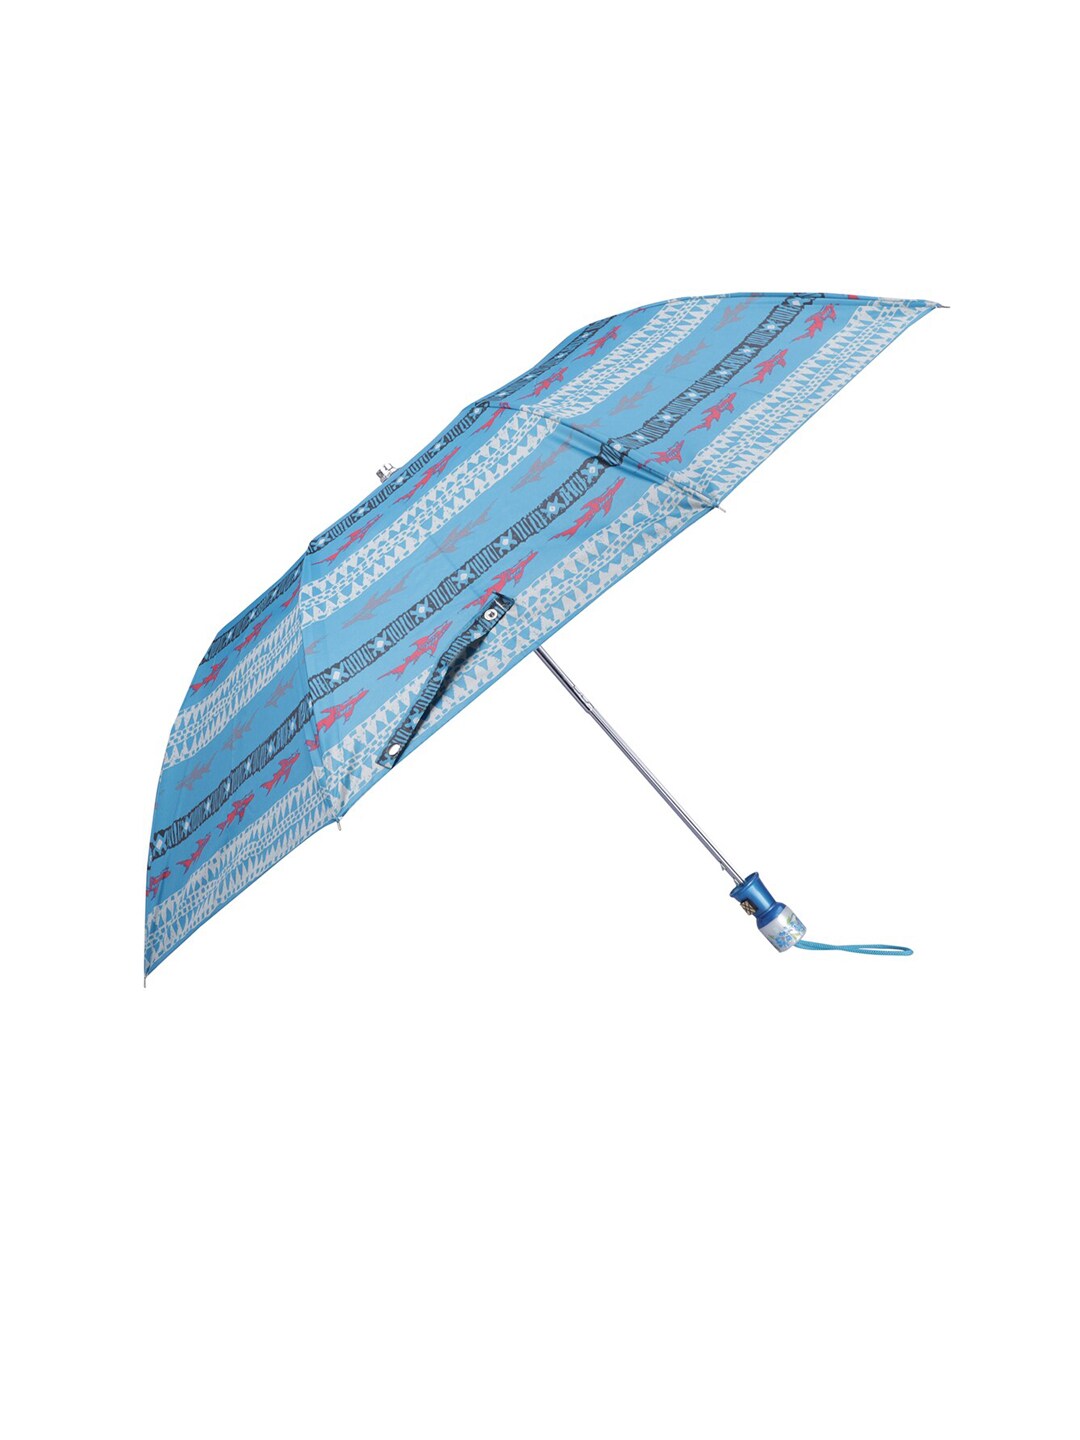 THE CLOWNFISH  Blue & White Printed Double-Coated Umbrellas